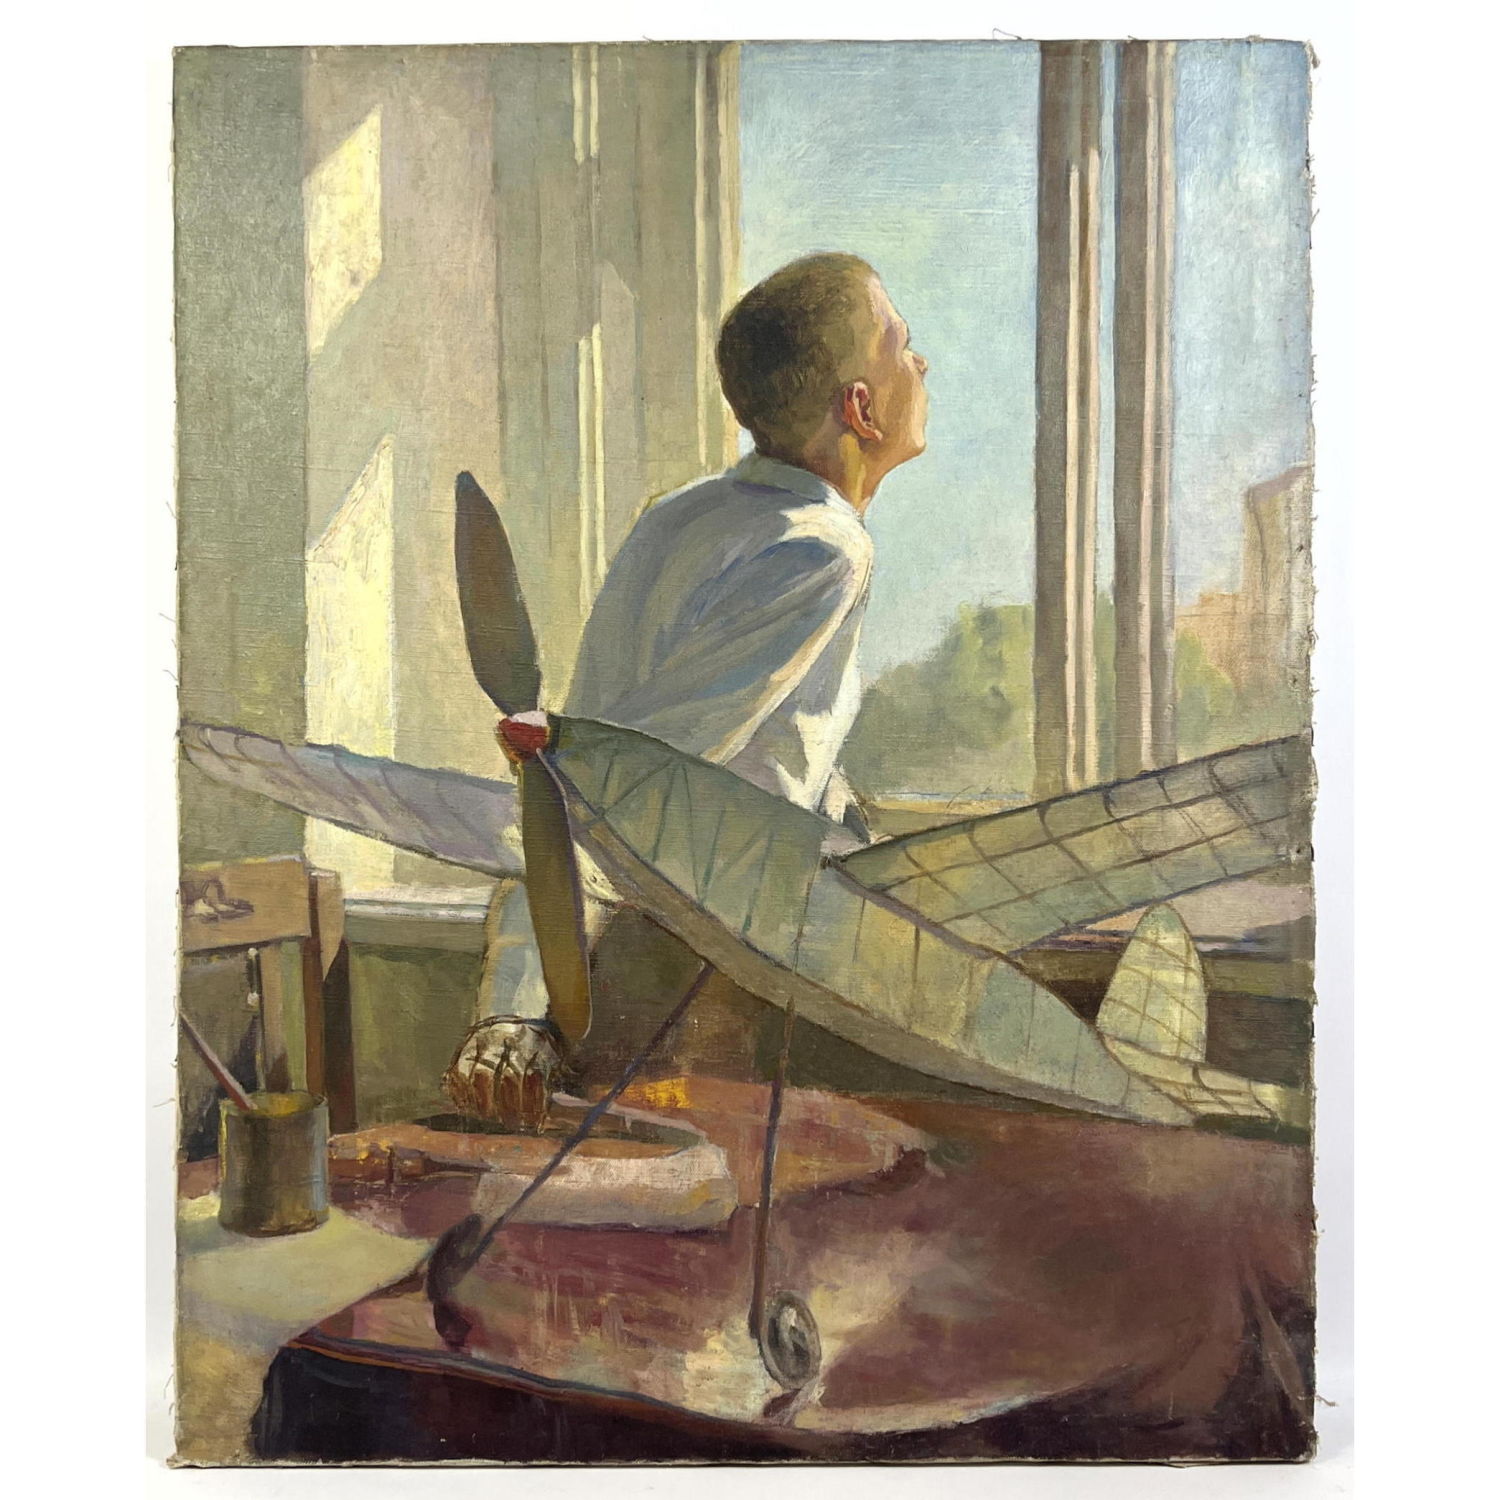 Painting on Canvas. Boy with Model Airplane